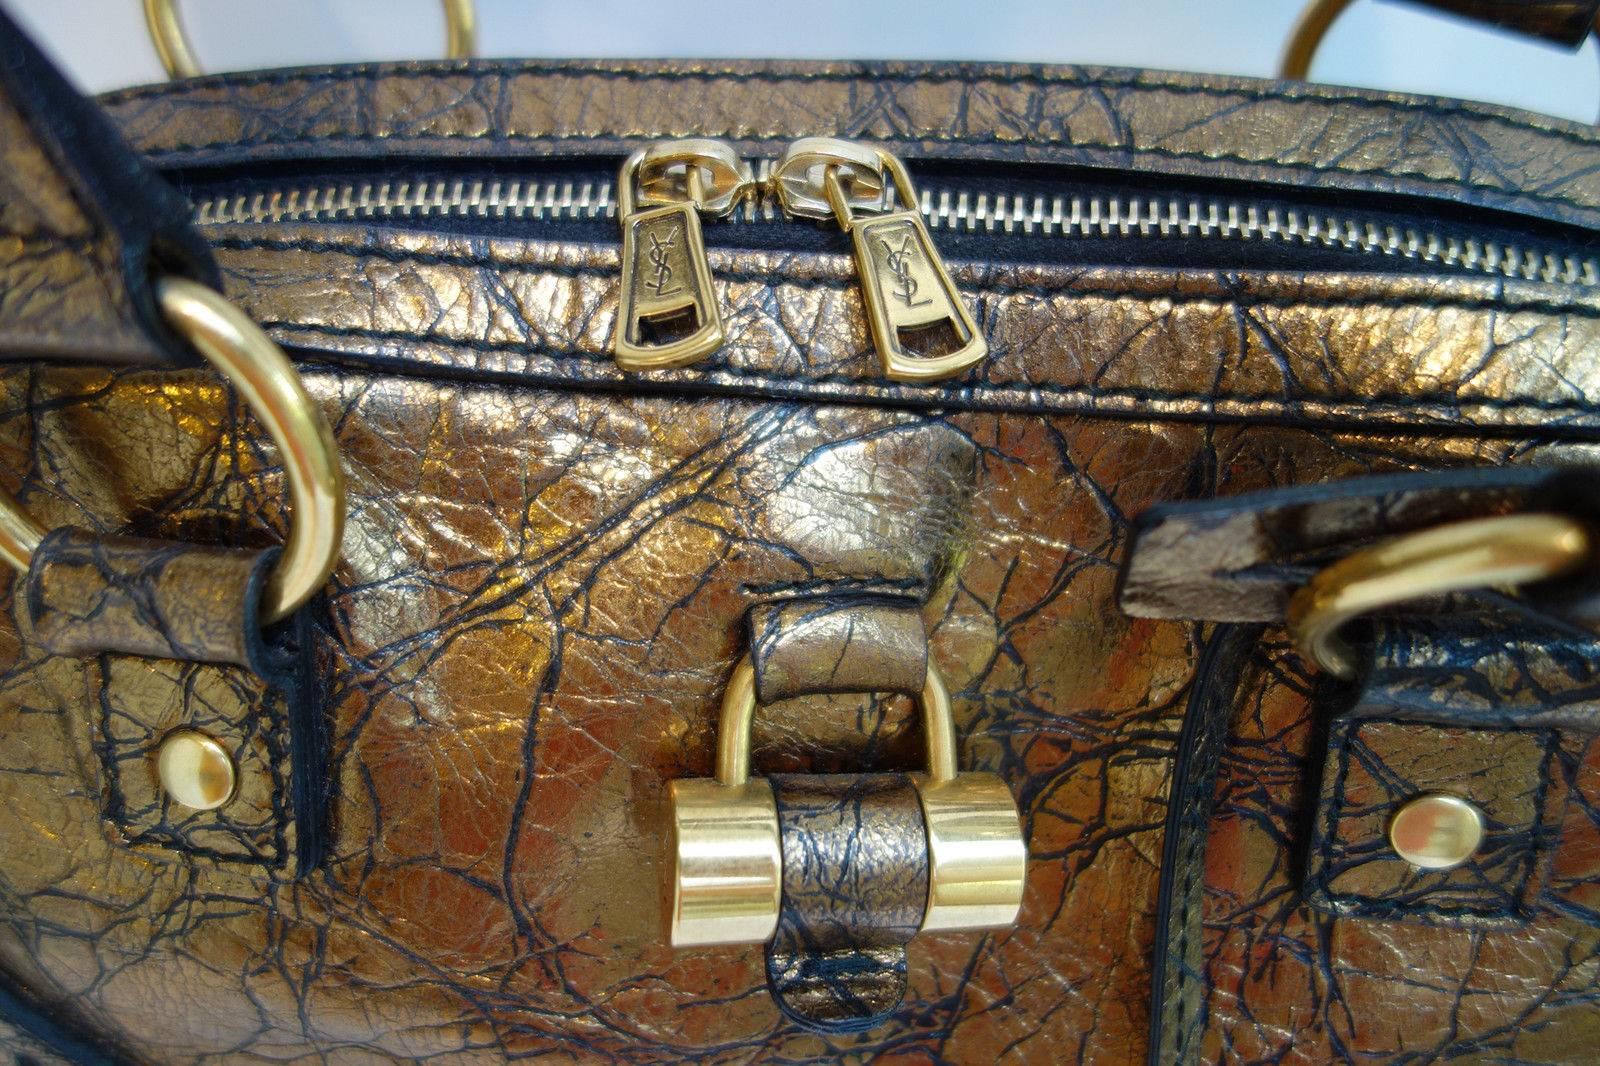 Bronze Distressed metallic leather with seamed stitch detail and logo imprint at front. Hard to find color, collectors piece. Absolutely stunning!
Antique gold tone padlock at front and ring detail at sides. Top two-way zip closure, leather straps